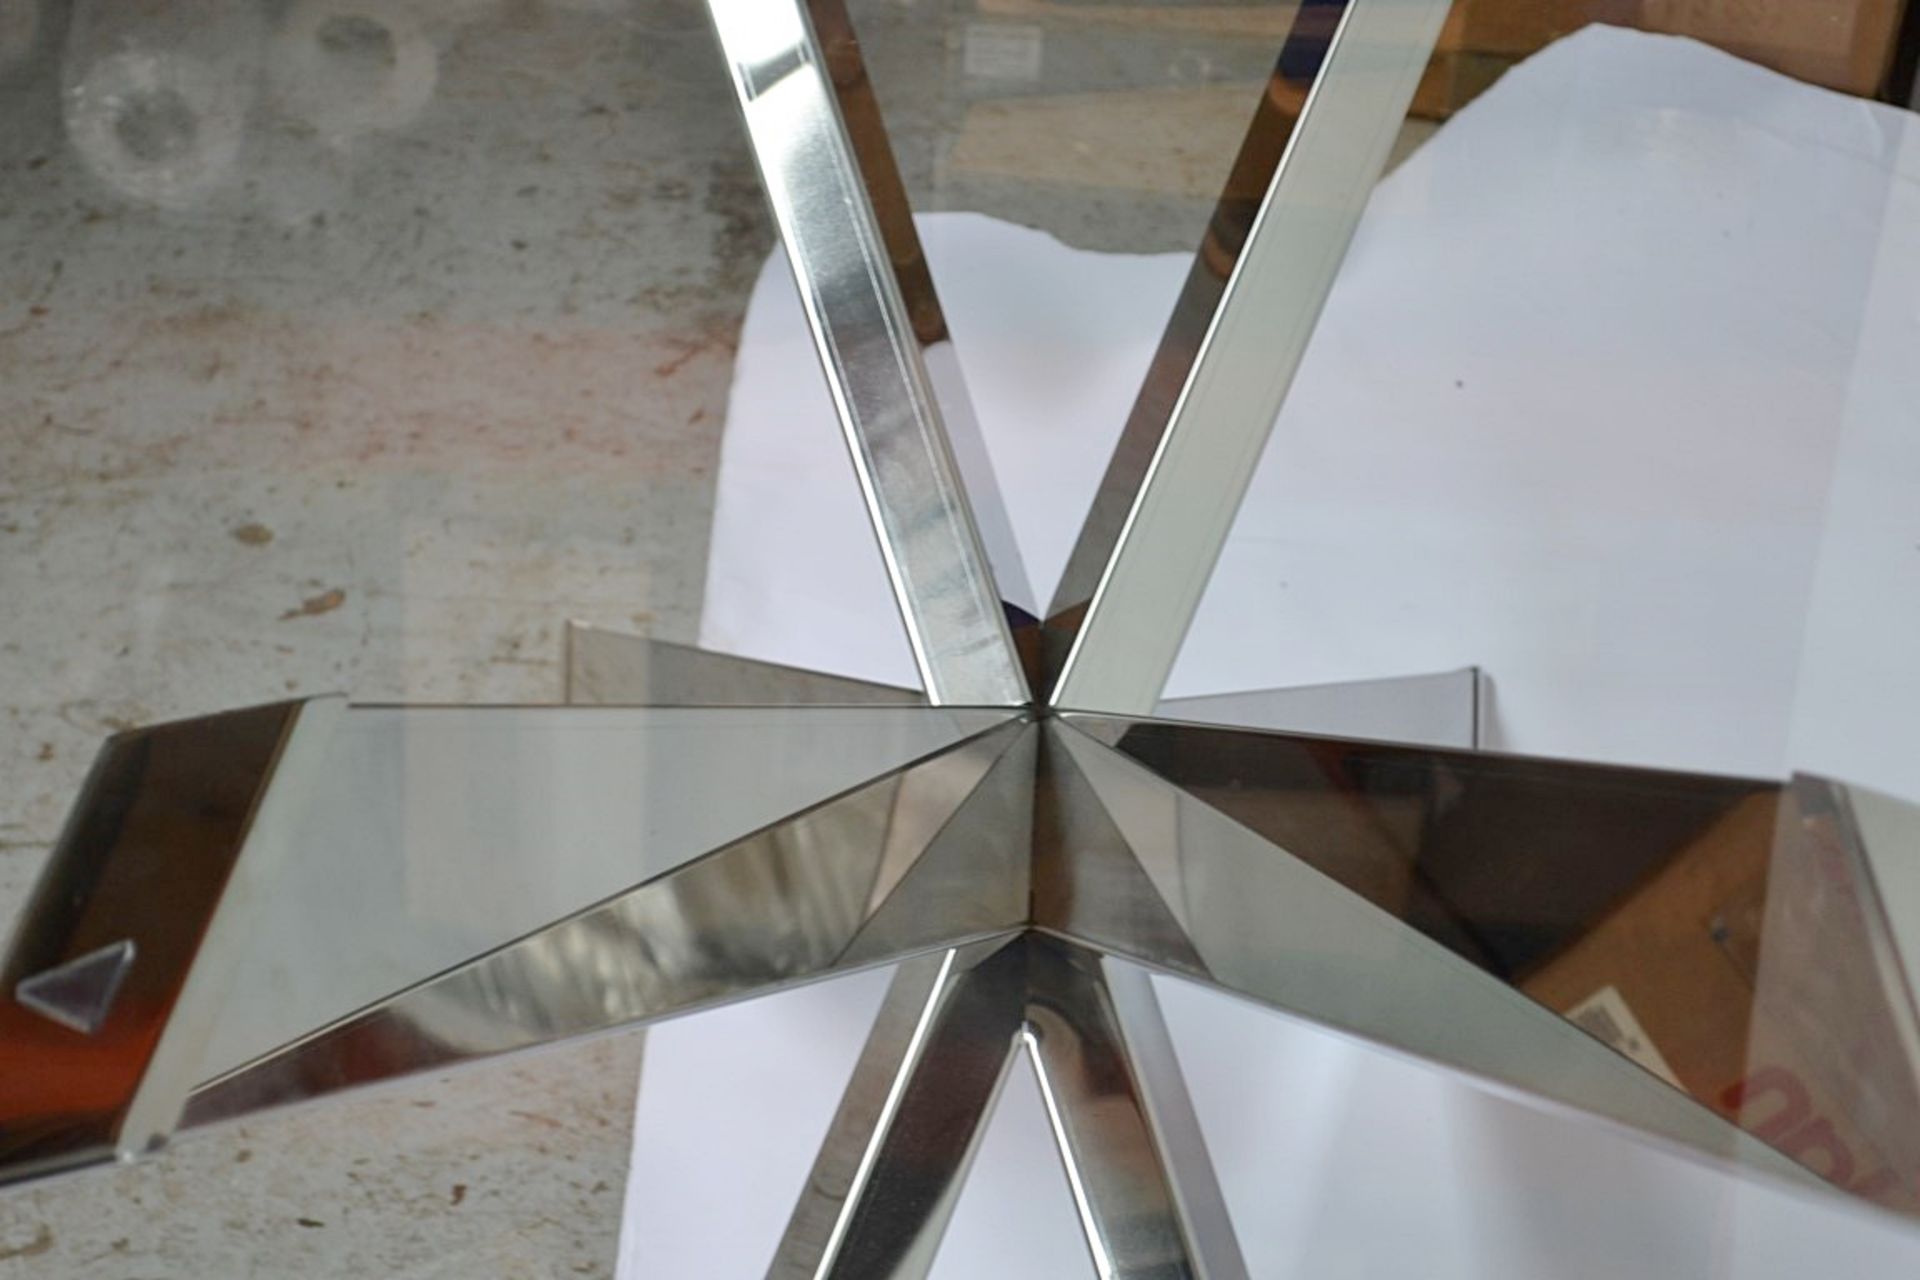 1 x CATTELAN "Spyder" Glass Topped Table - Stunning Piece In Great Condition - Dimensions: - Image 4 of 6